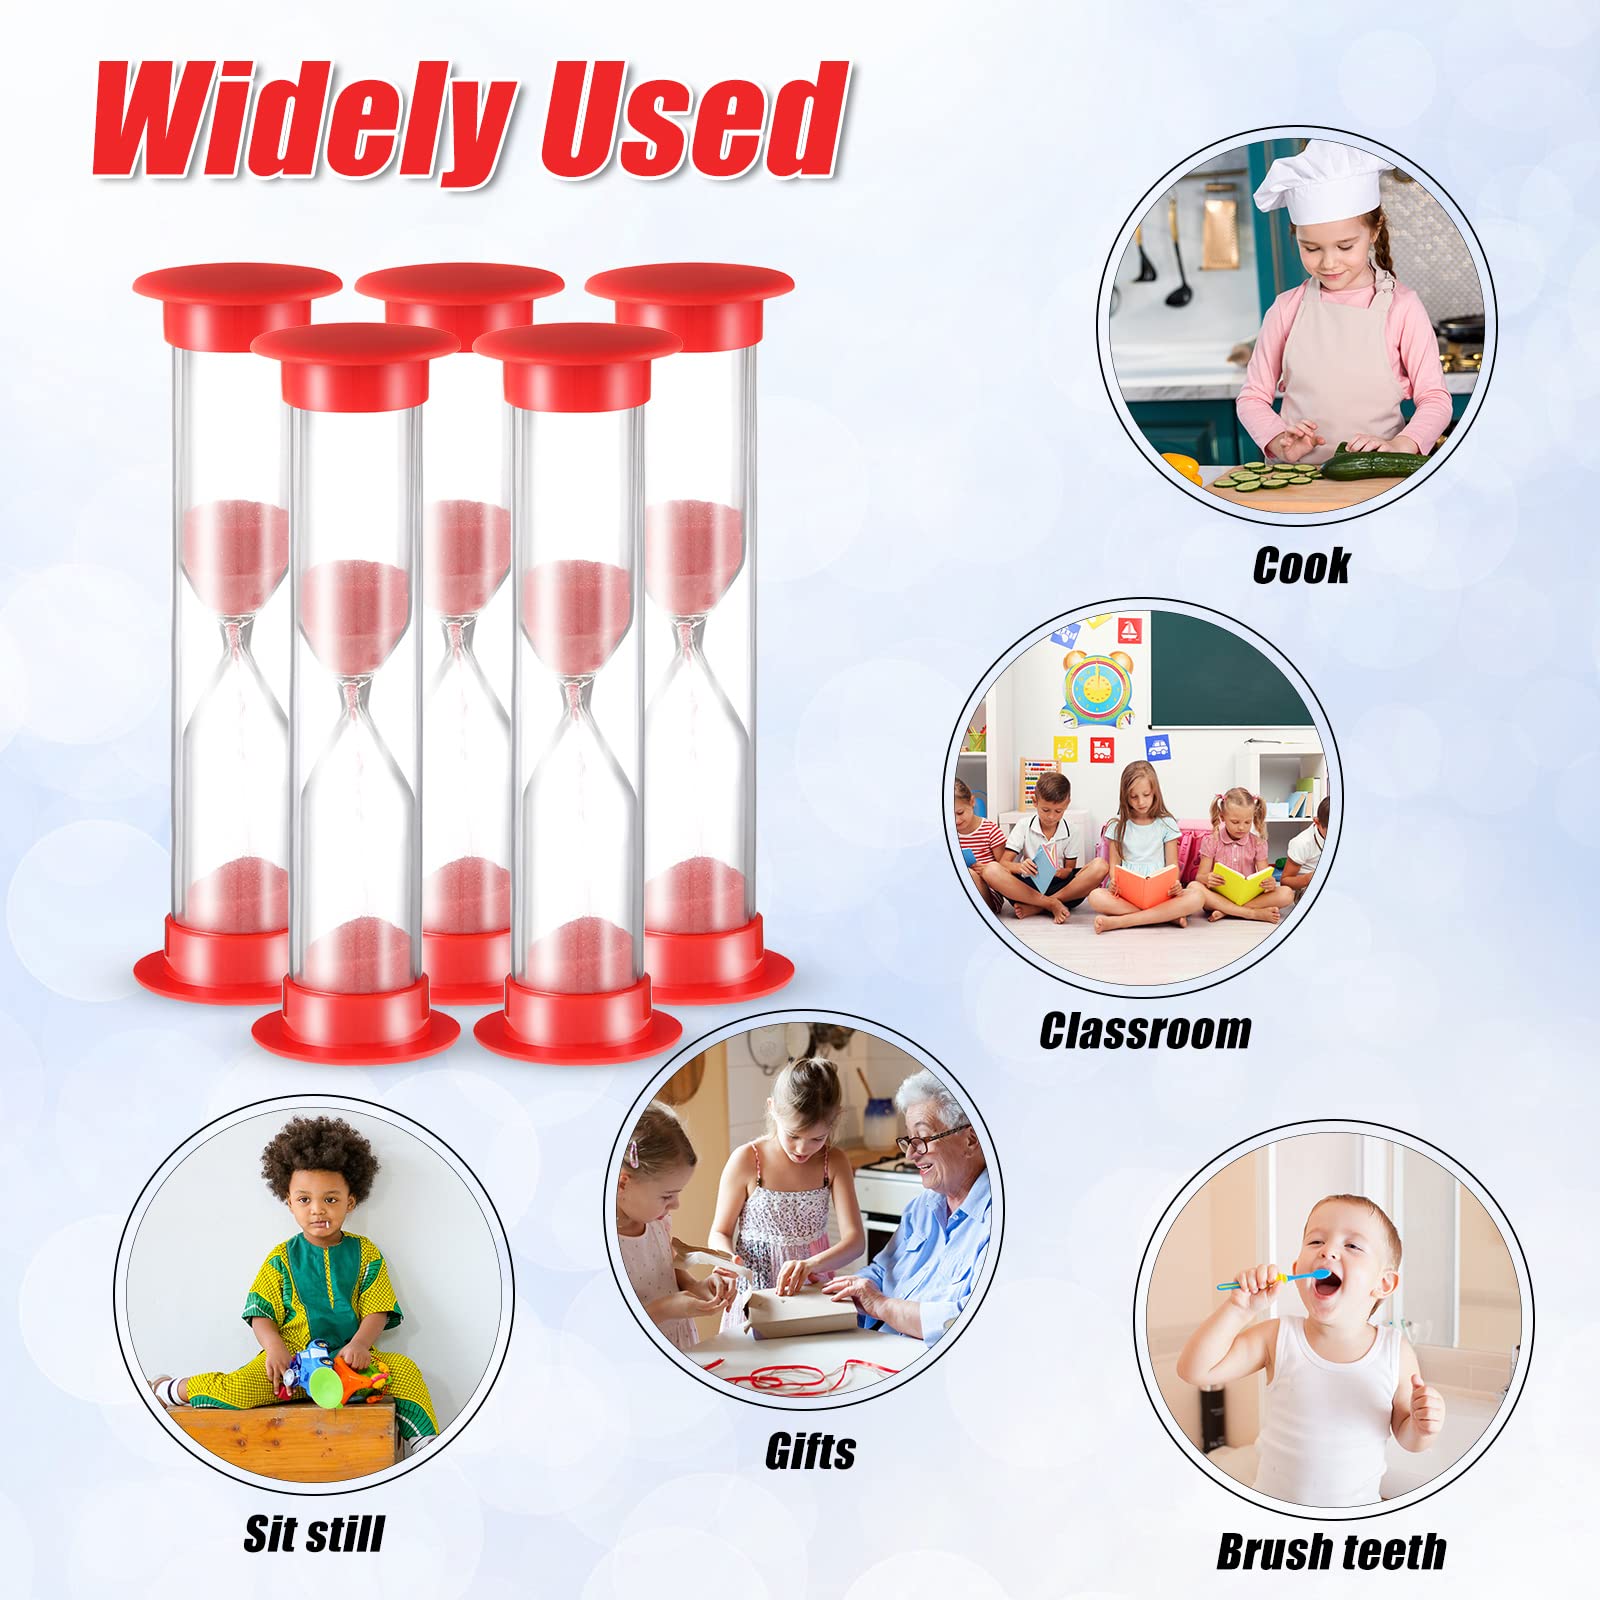 Set of 80 1 Minute Sand Timer Small Hourglass for Classroom One Minute Sandglass Clock Red Acrylic Hourglass Game Timer for Kids Preschool Teacher Supplies, 3.35 x 0.98 x 0.98 Inches